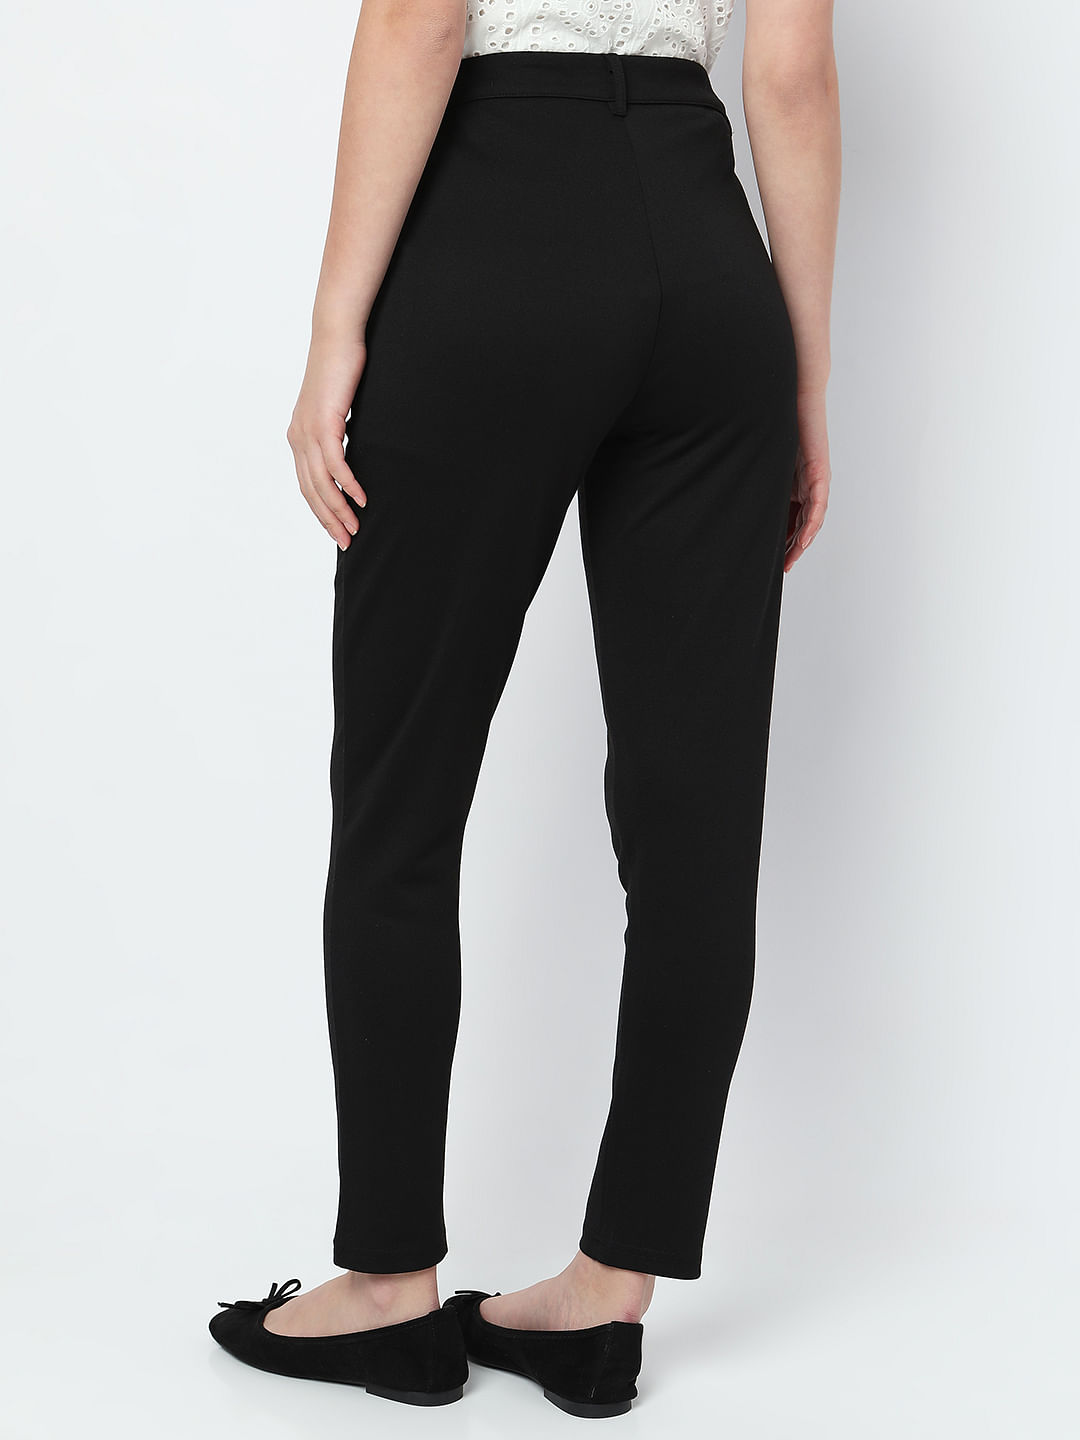 Broadstar Black Straight Fit High Rise Formal Trousers